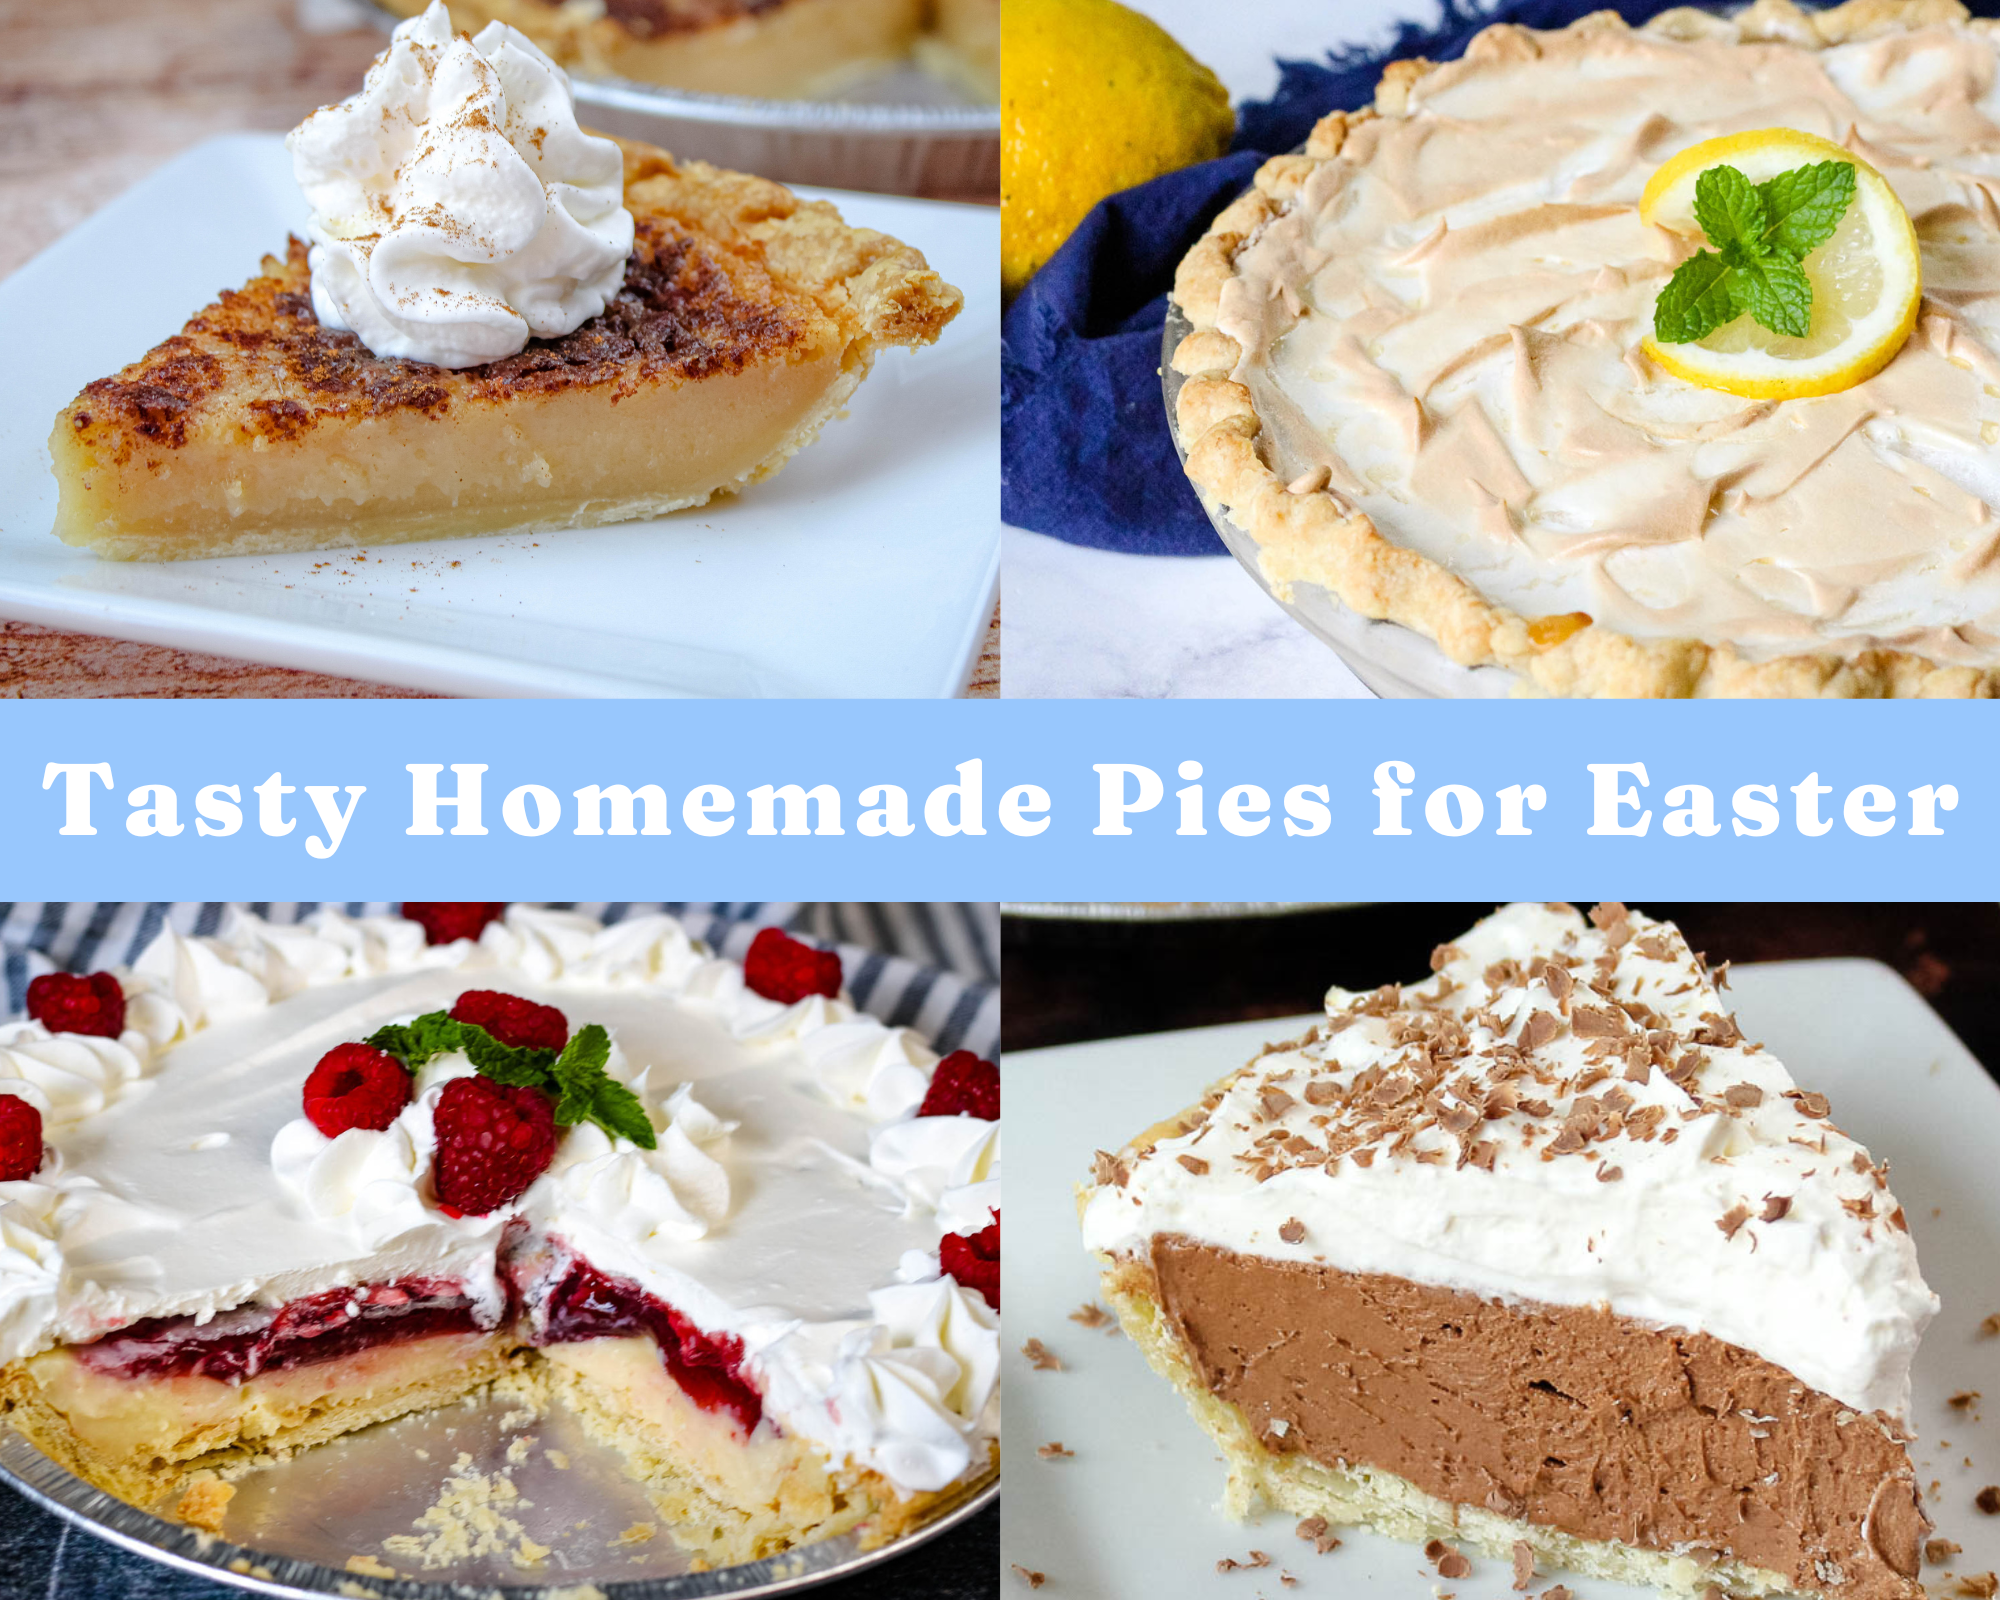 Tasty Homemade Pies for Easter